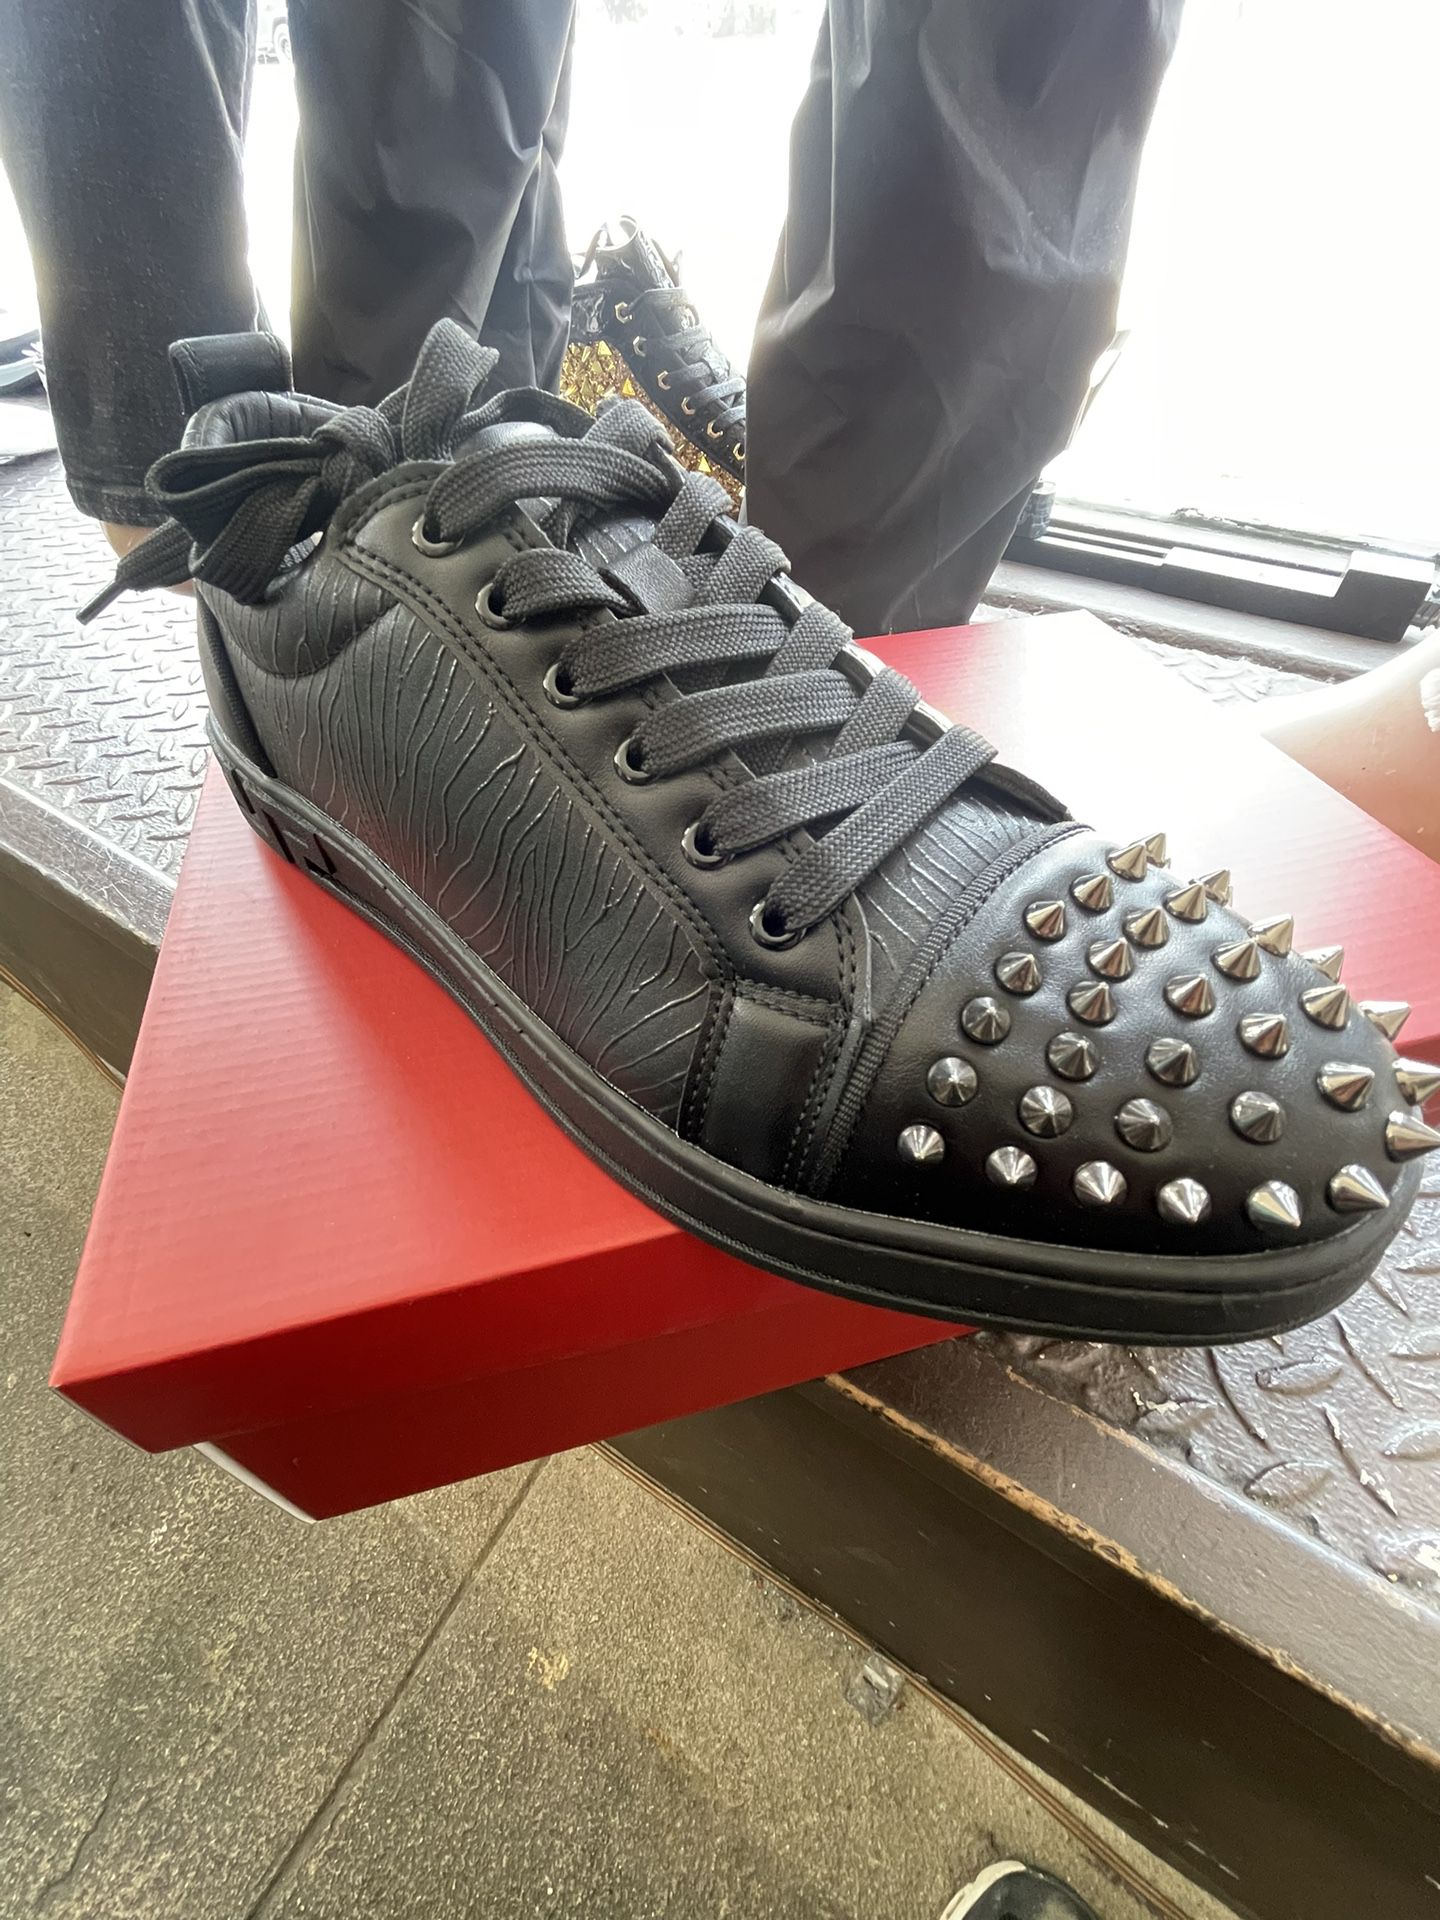 Men’s Black Leather Studded Shoes Sizes 8-9-10-11-12